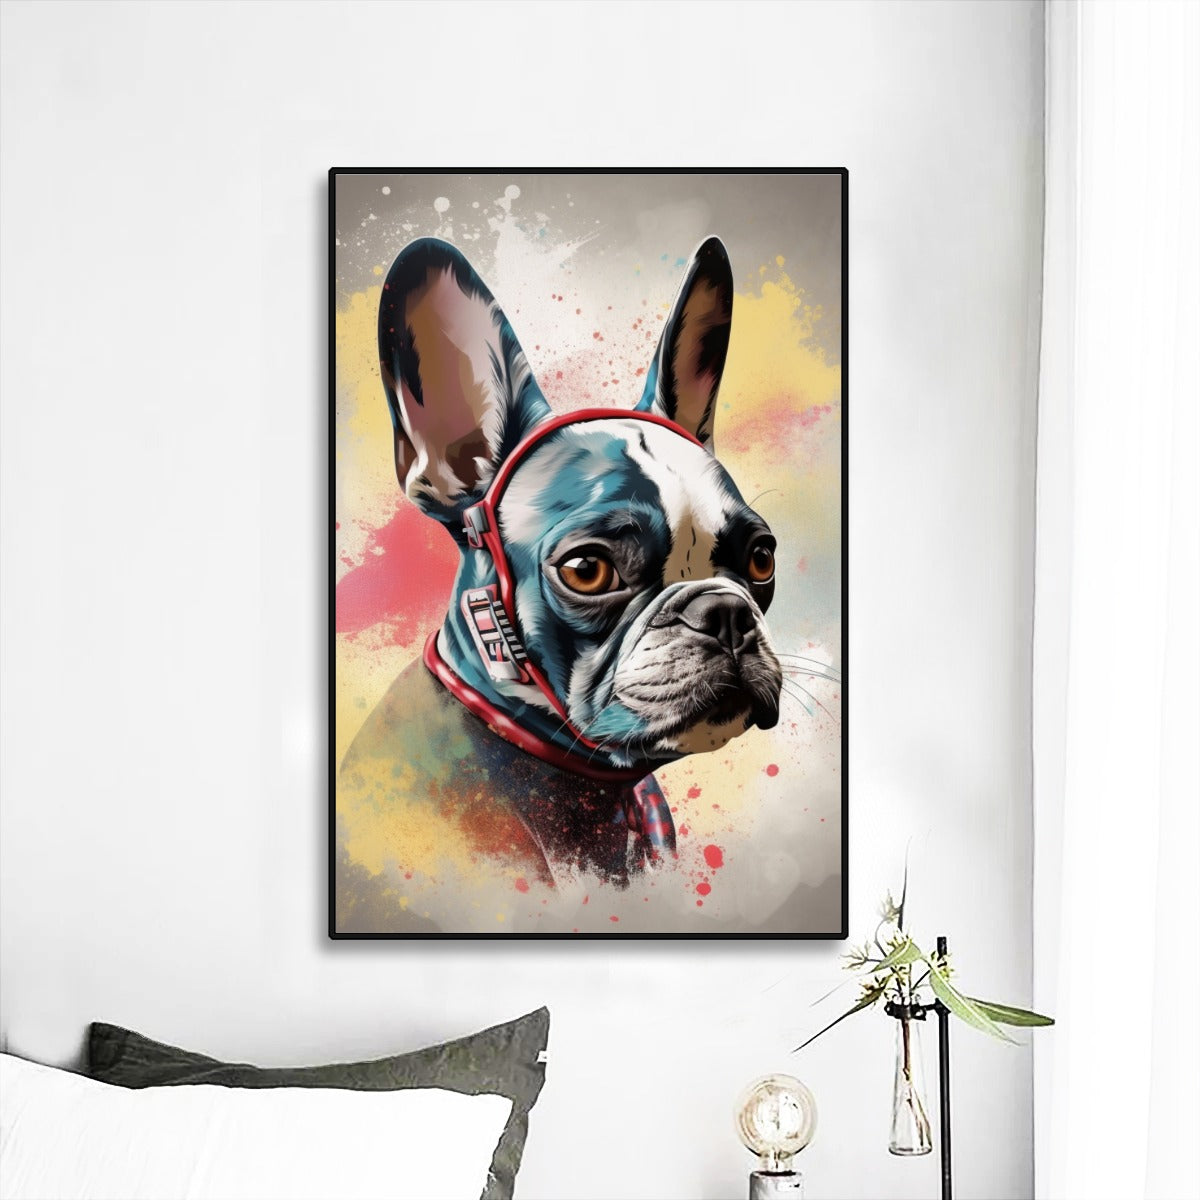 Mesmerizing Frenchie-Inspired Wall Mural